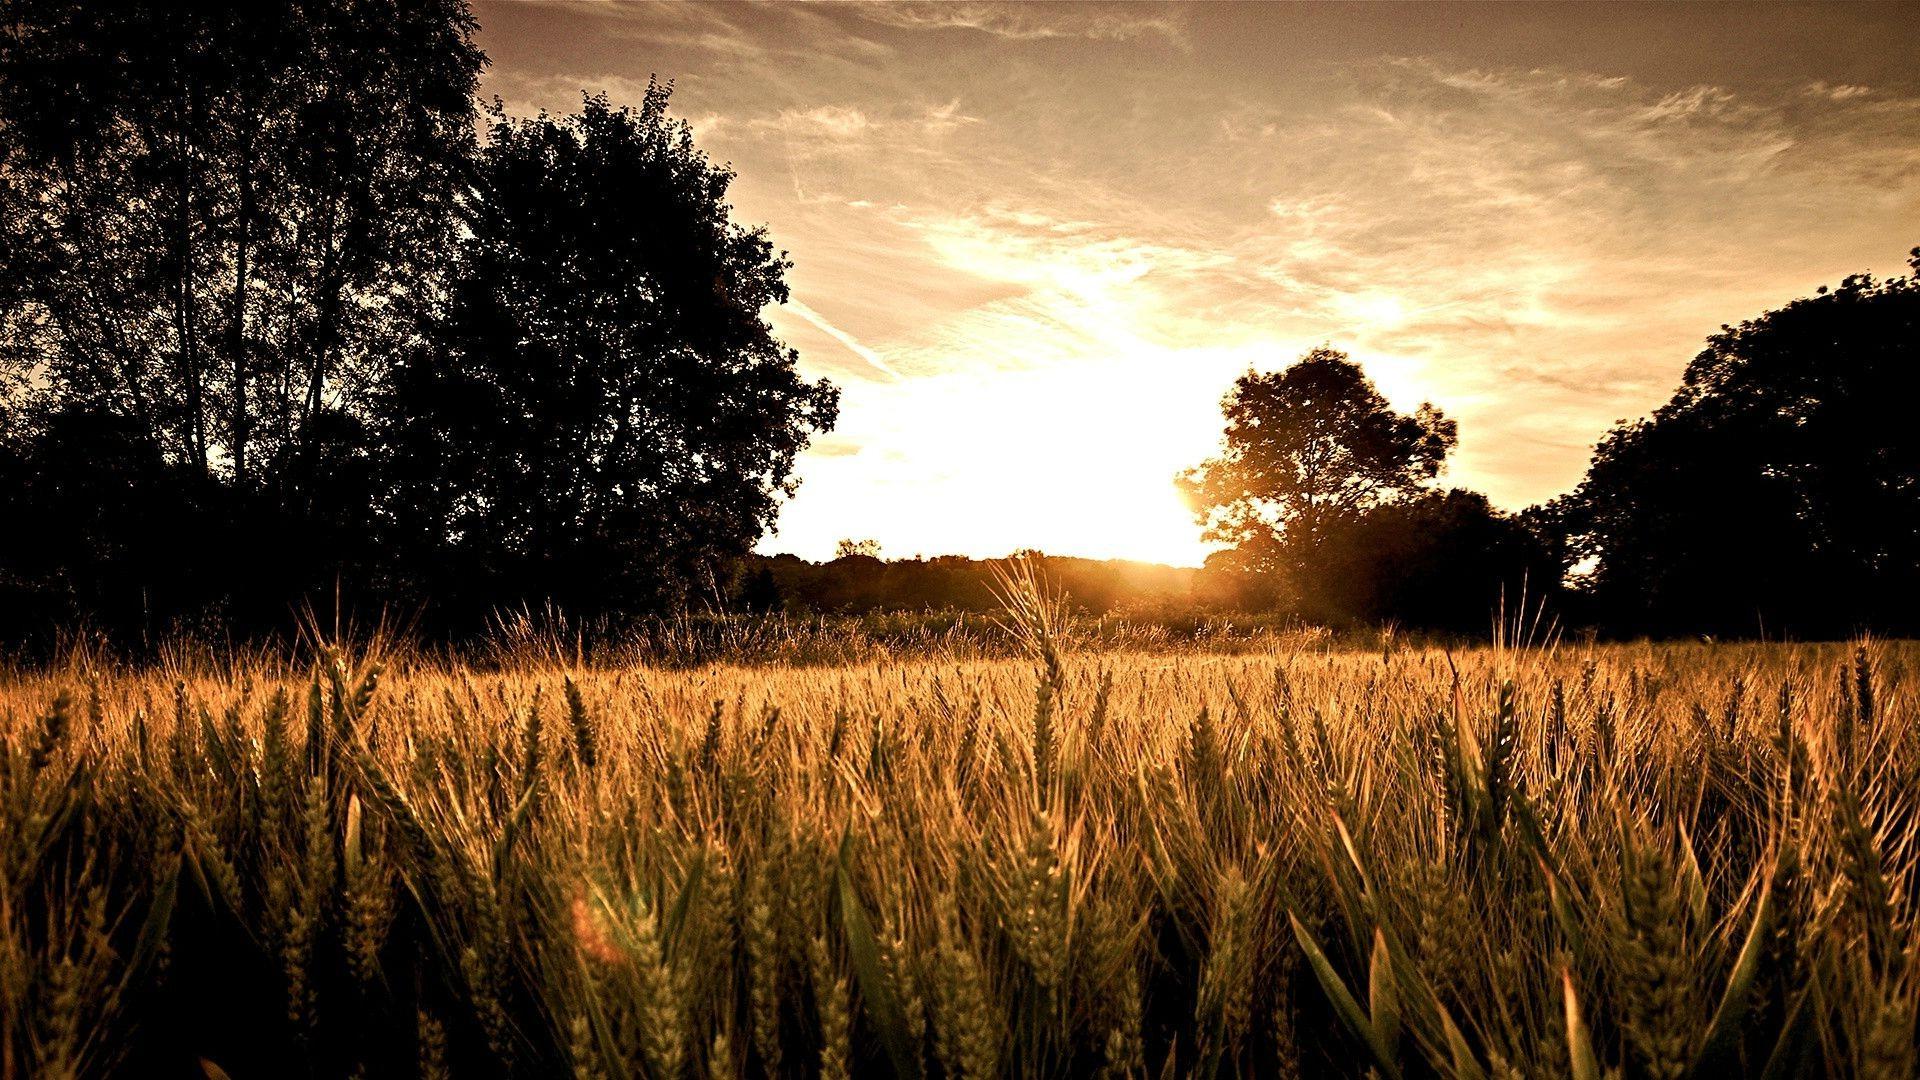 nature, Landscape, Field, Trees, Silhouette, Sunset, Spikelets